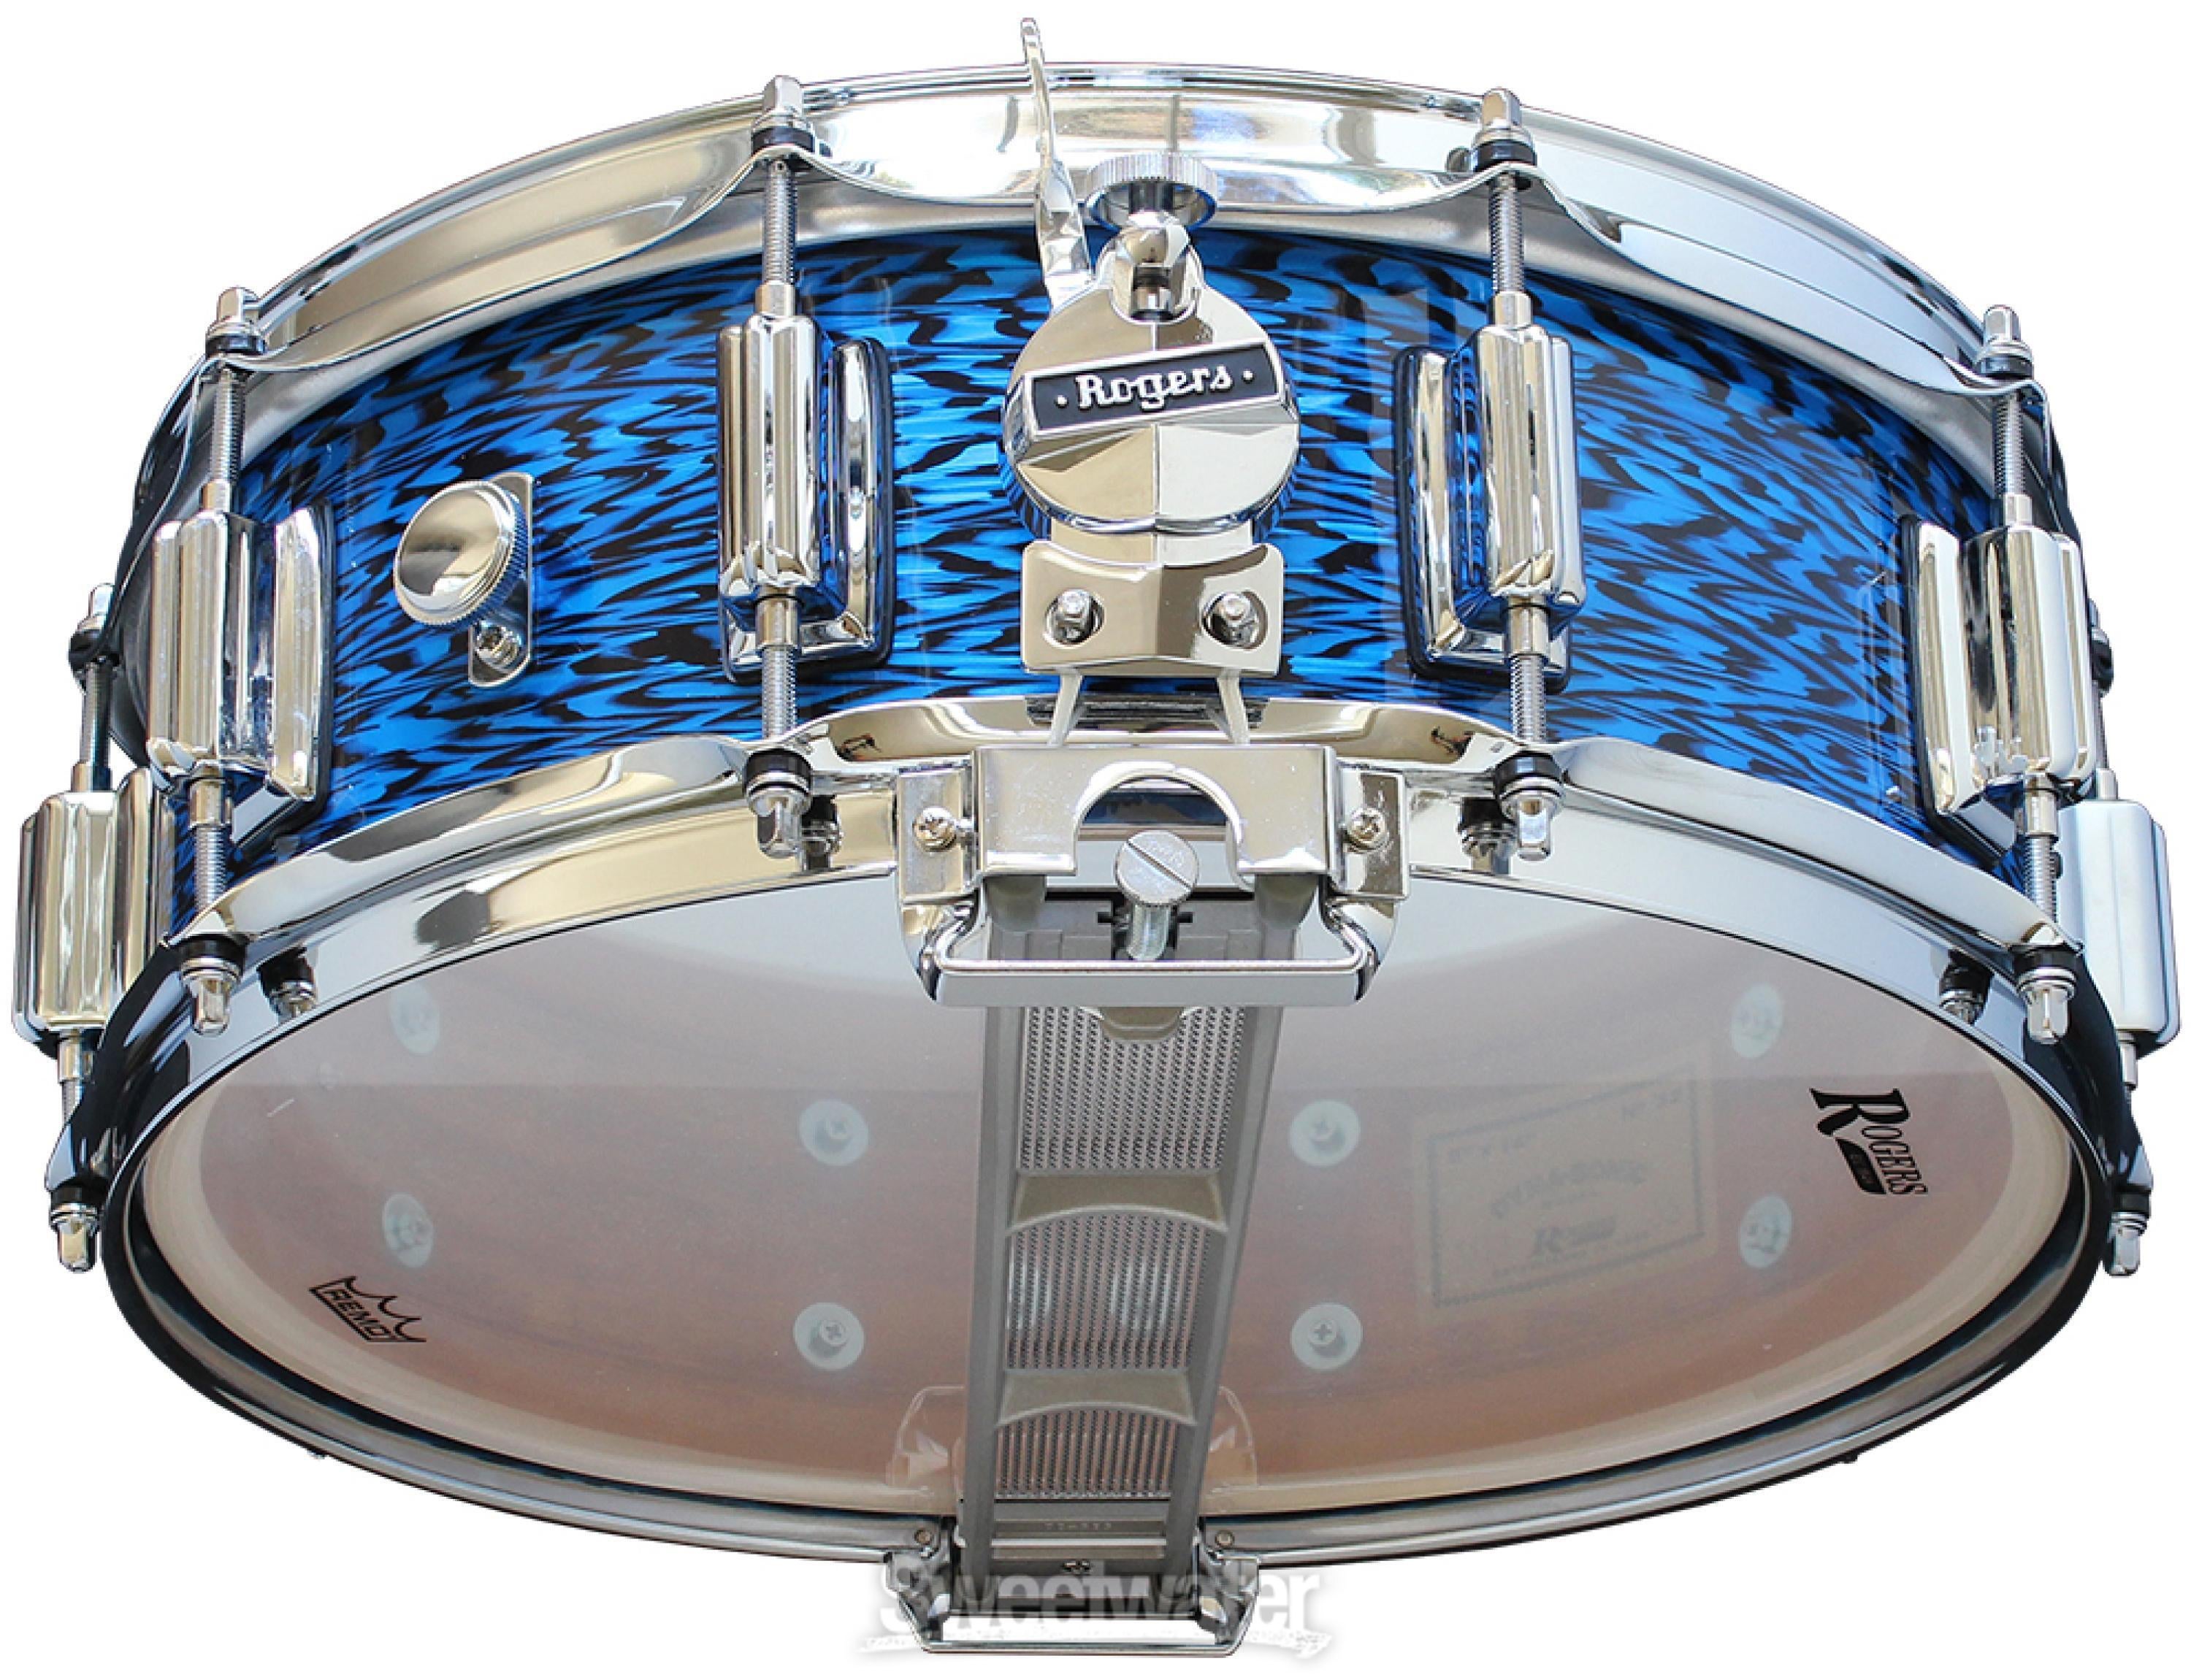 Rogers Drums Dyna-sonic Snare Drum - 5 x 14 inch - Blue Onyx with  Beavertail Lugs